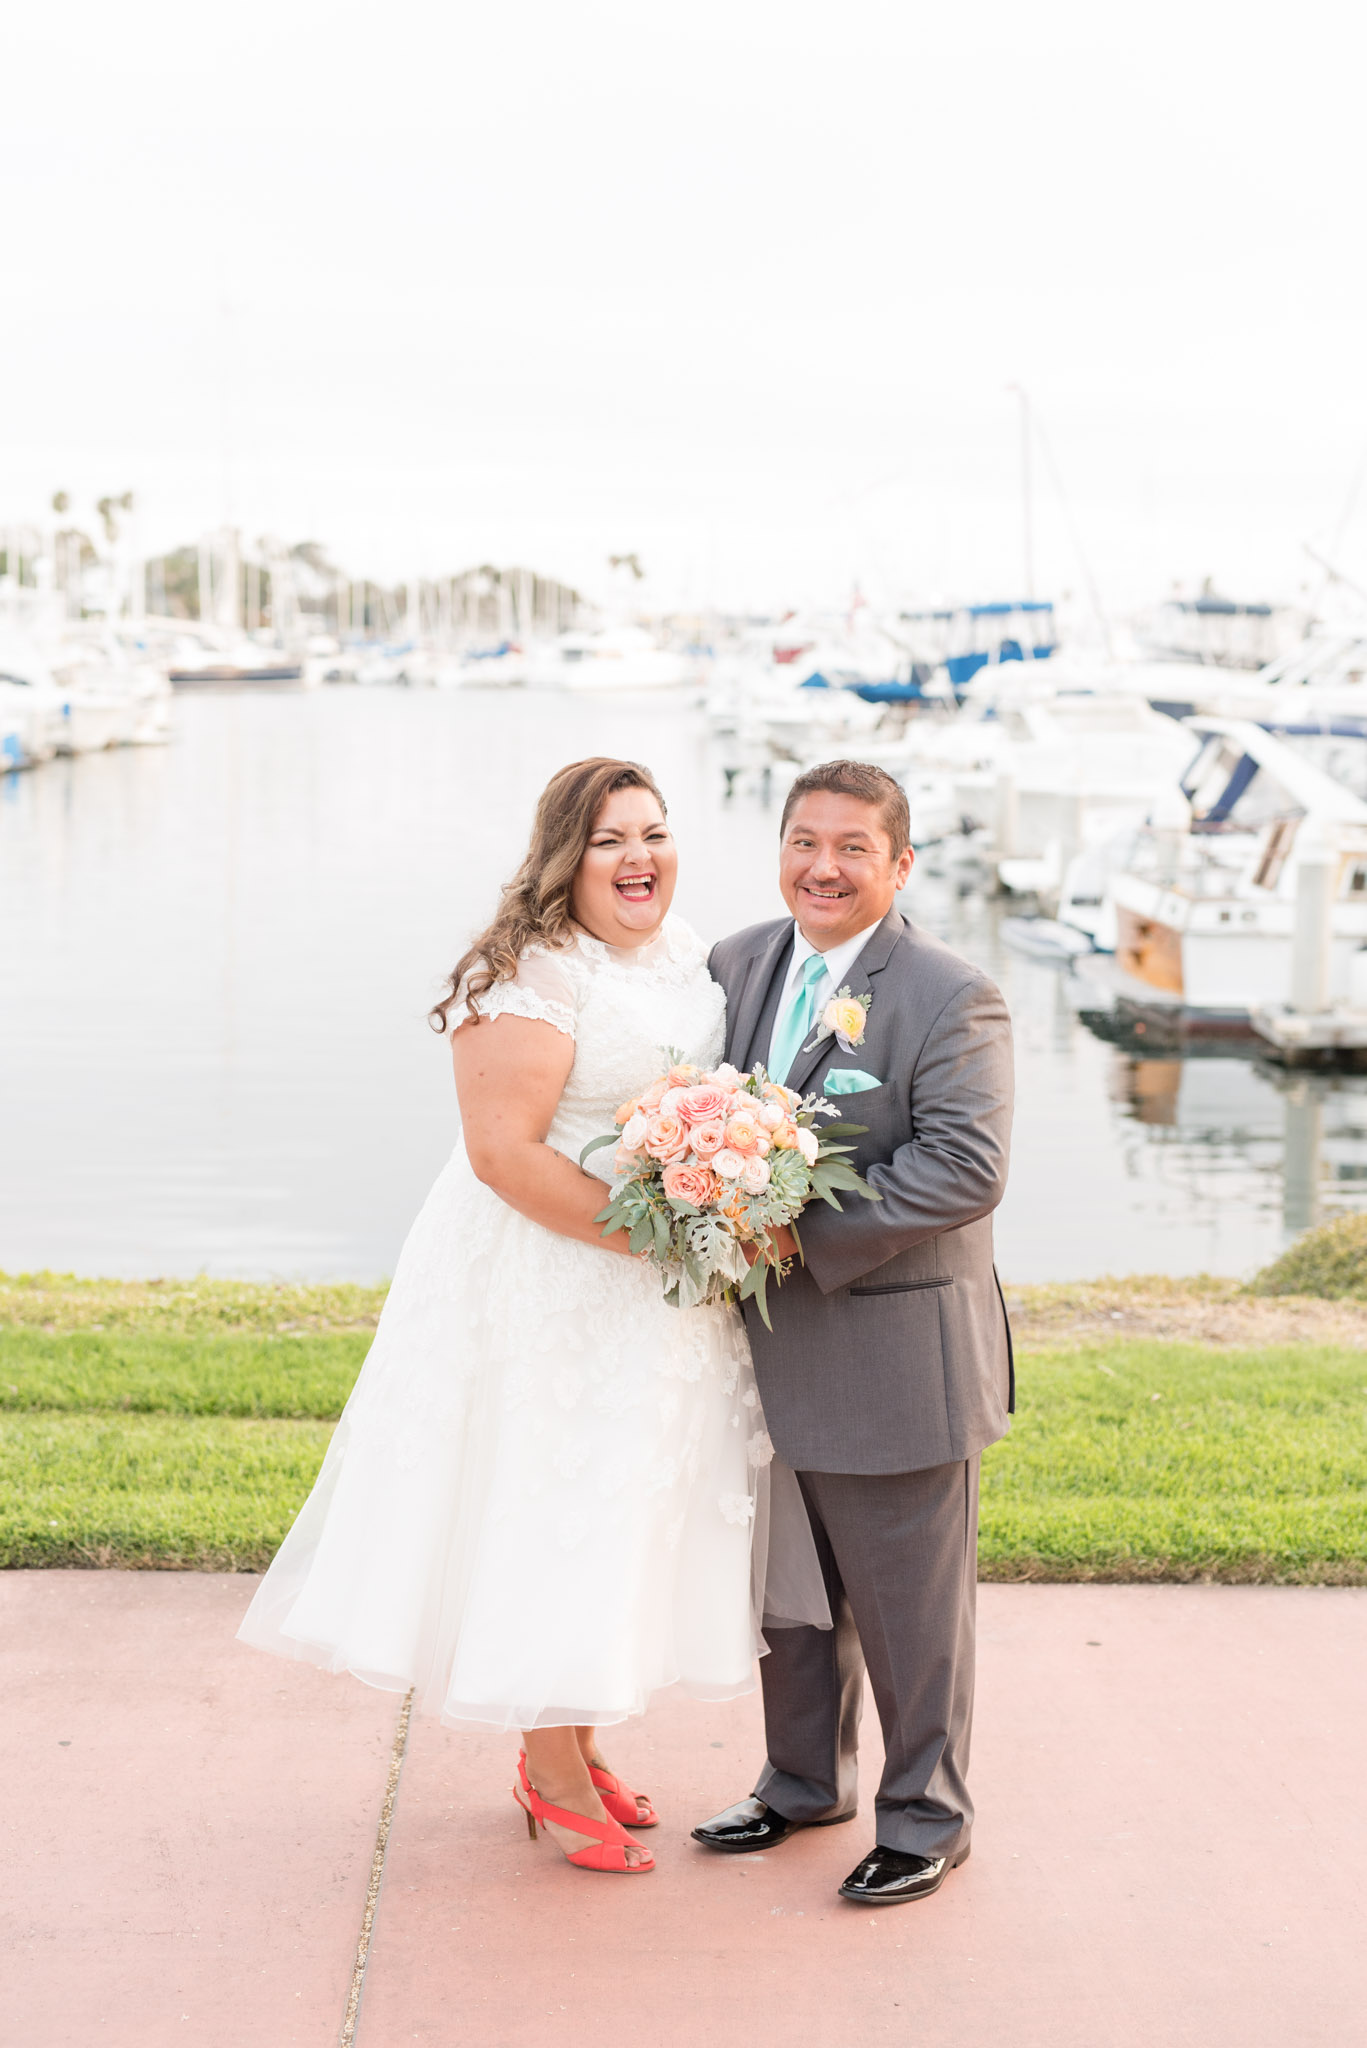 Bride and groom laugh while in front of a marina.